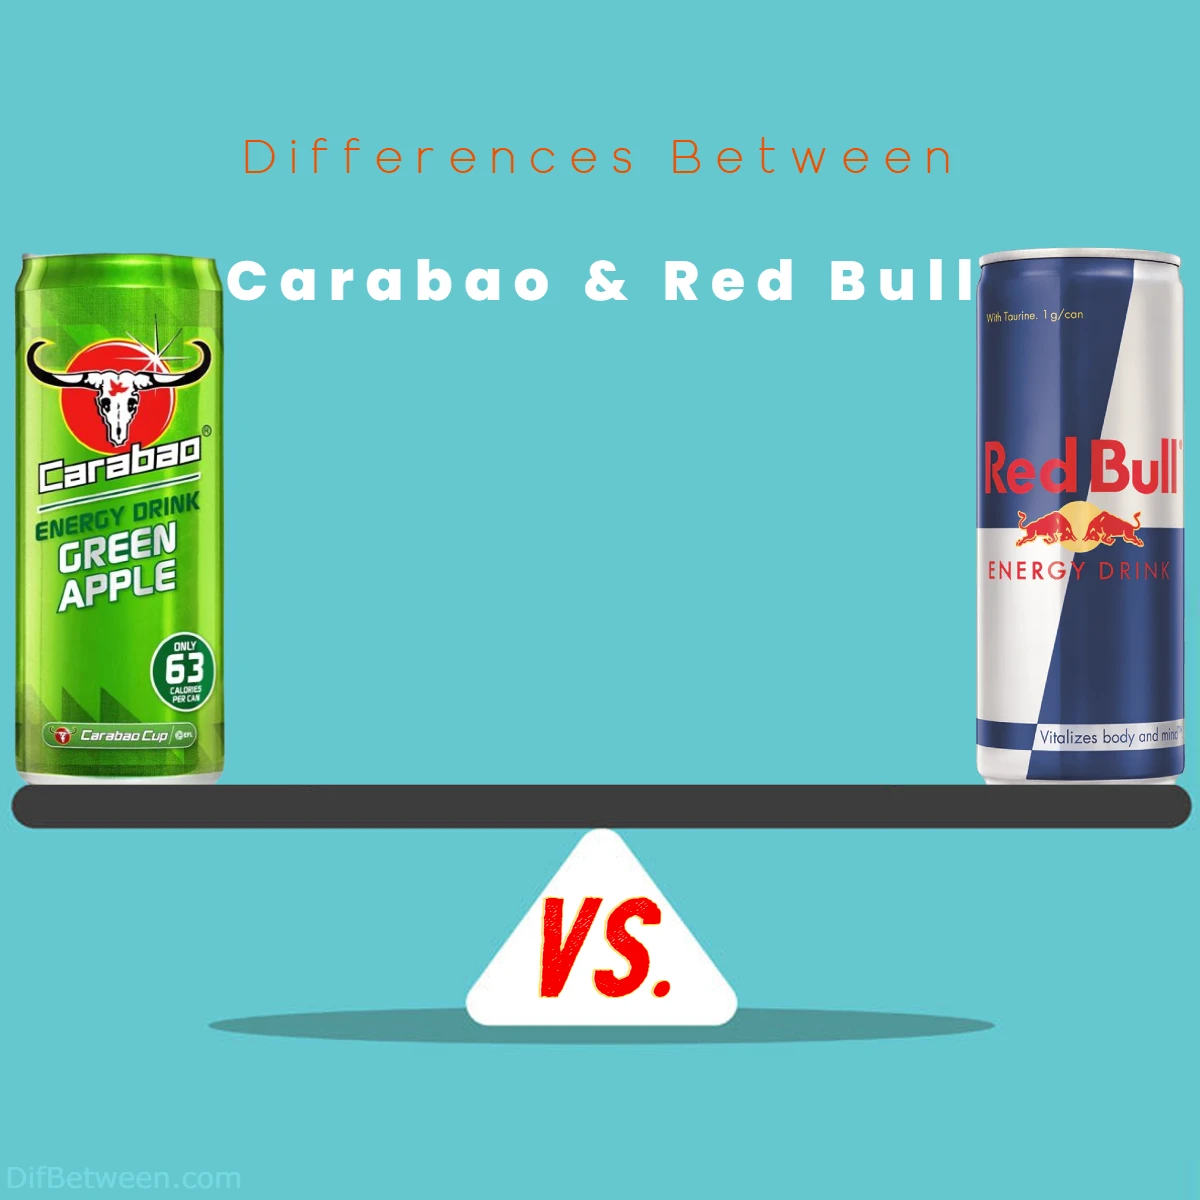 Difference Between Red Bull and Carabao Energy Drink